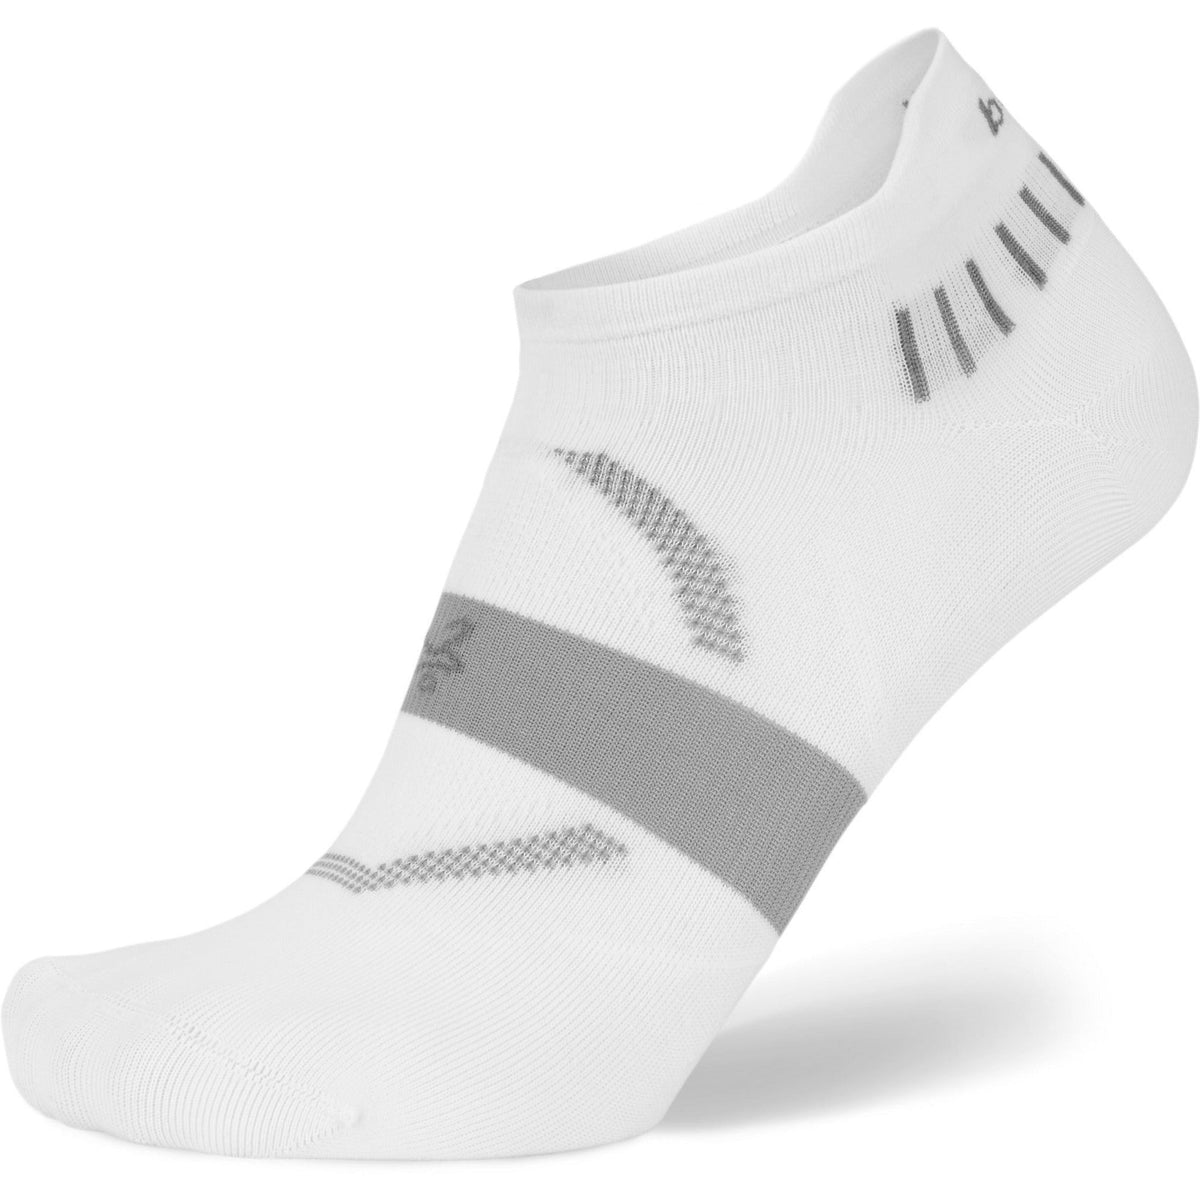 Running and Training Socks | Free Shipping on orders $40+ at GoBros.com ...